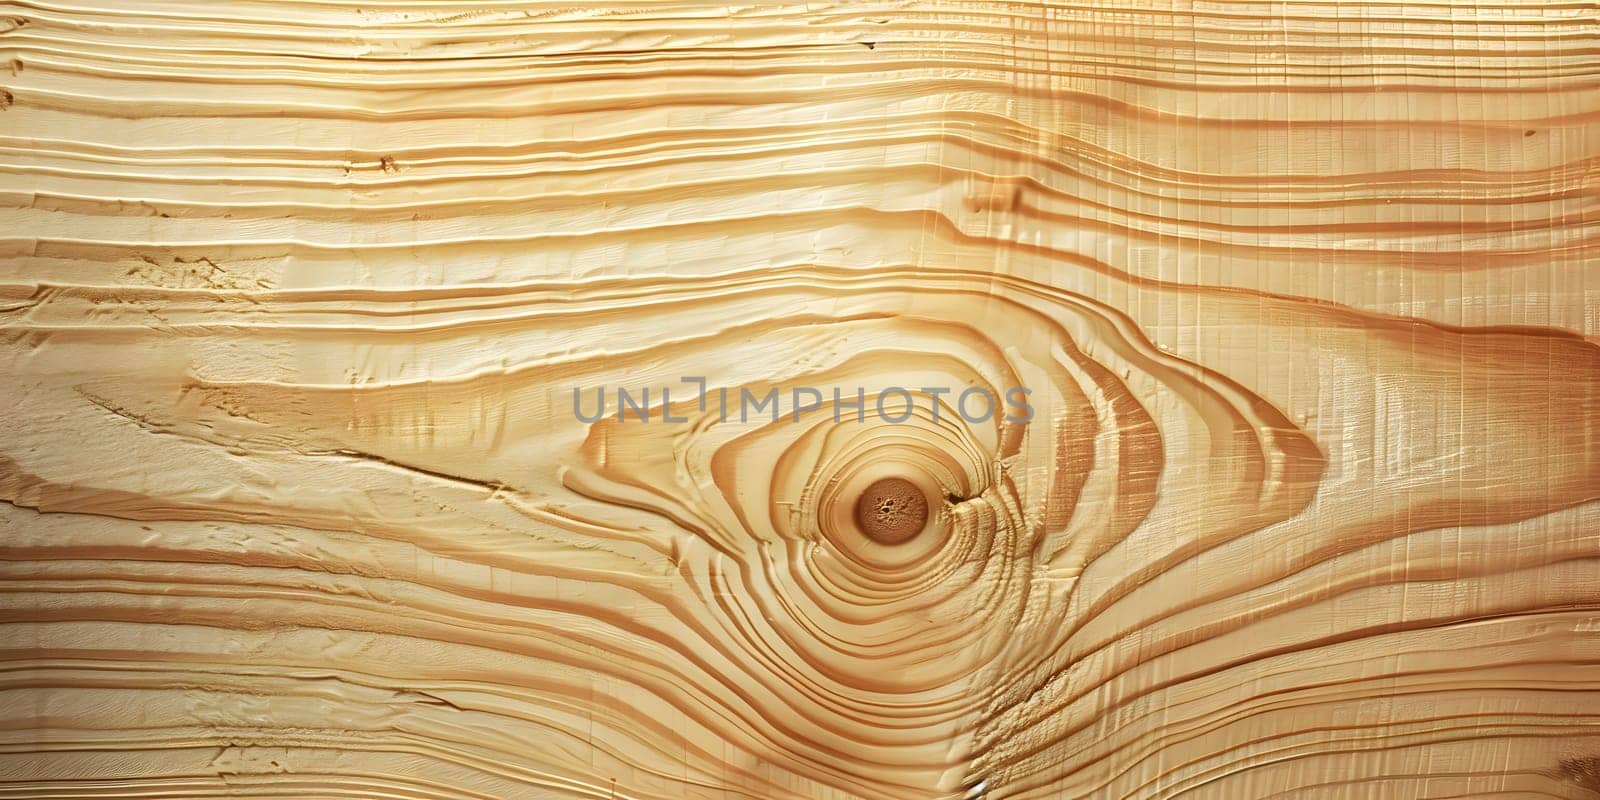 A closeup of a brown hardwood piece with a knot in its pattern, perfect for wood flooring or plywood projects. Add wood stain or varnish to enhance its natural beauty at your event